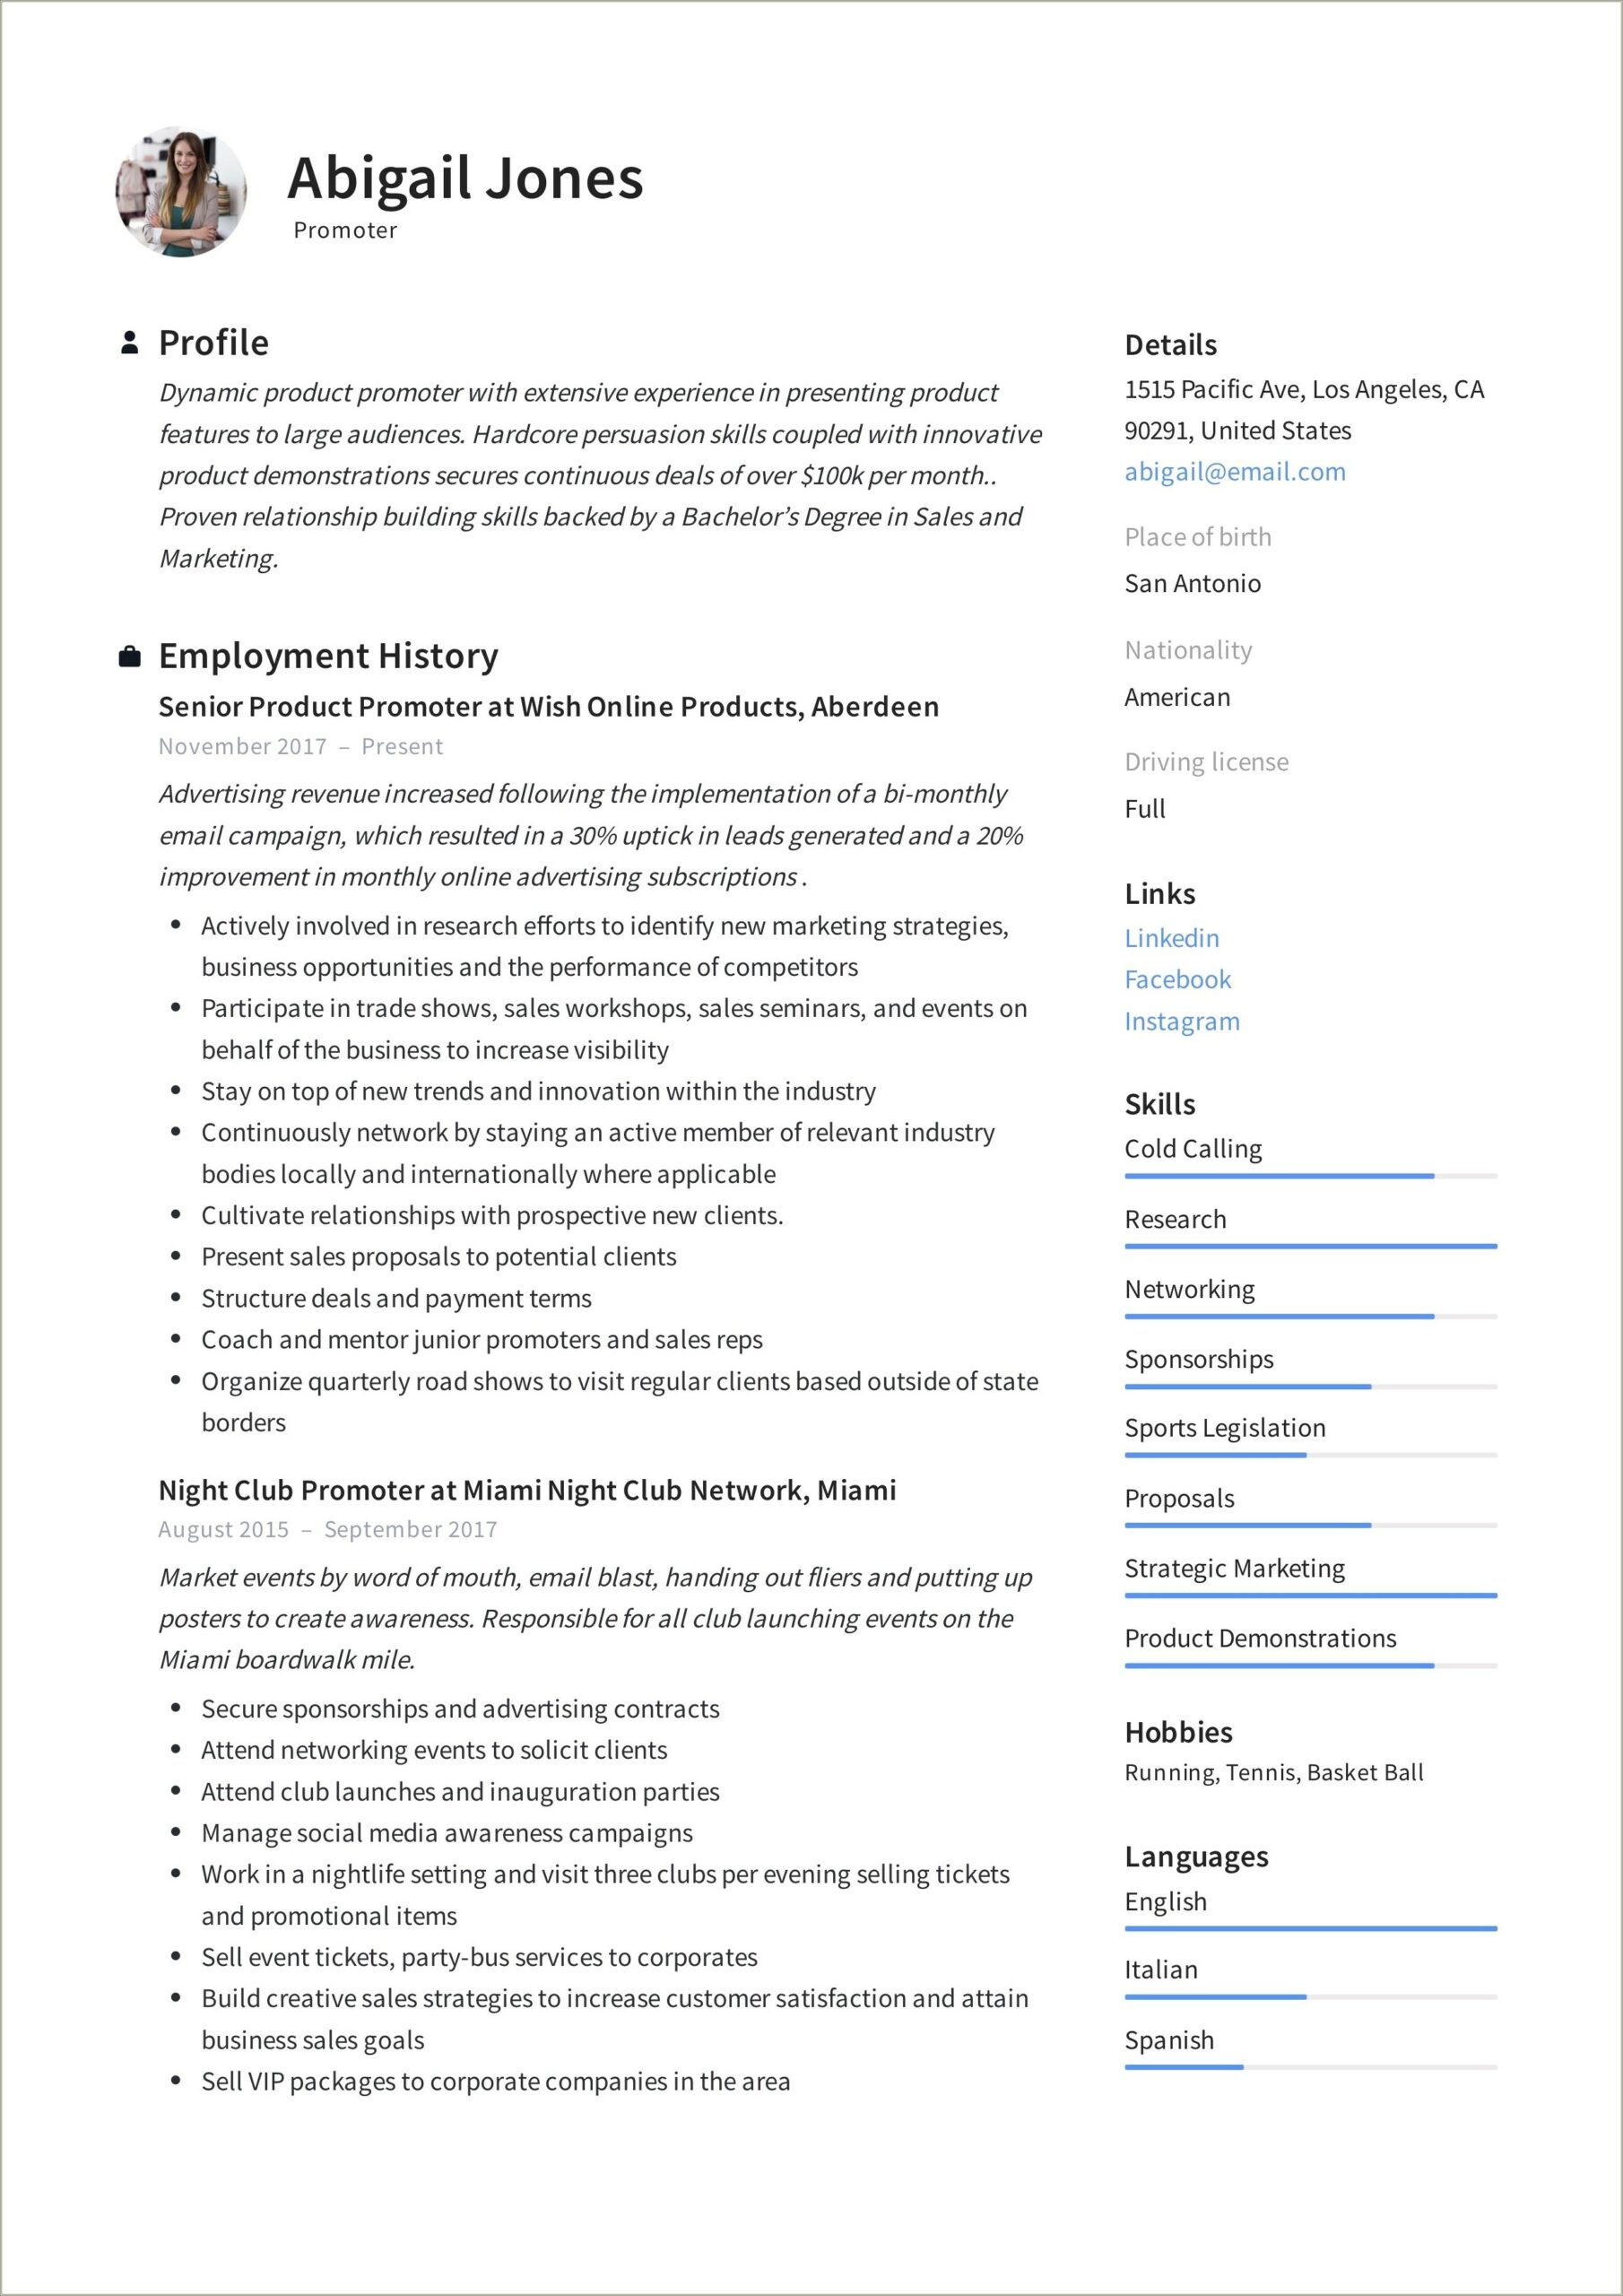 Example Of Professional Resume With A Profile